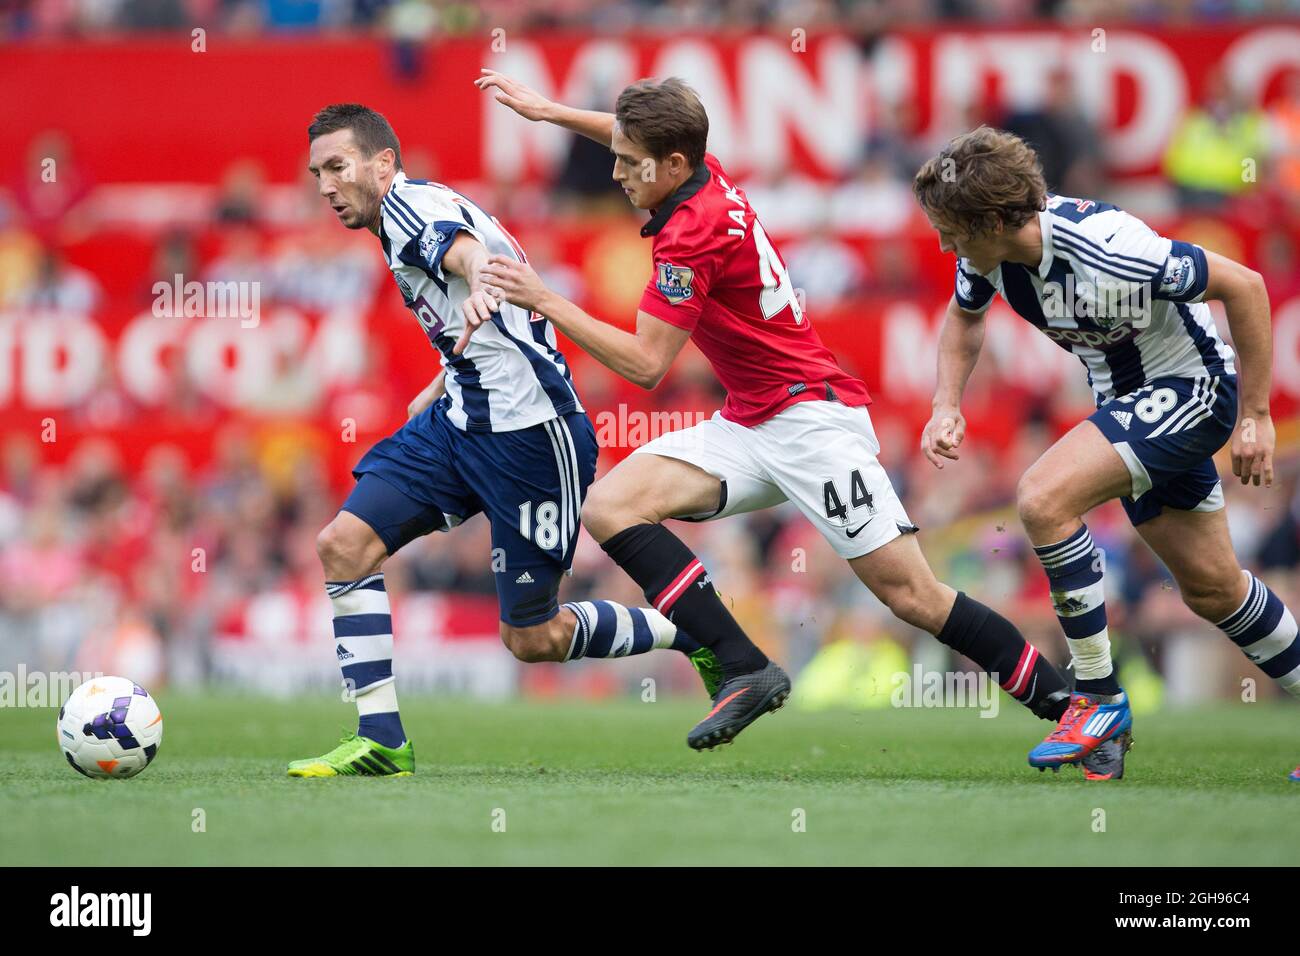 West Brom's Morgan Amalfitano battles Adnan Januzaj of Manchester United during the Barclays Premier League match between Manchester United and West Bromwich Albion at the Old Trafford in Manchester, United Kingdom on September 28, 2013. Stock Photo